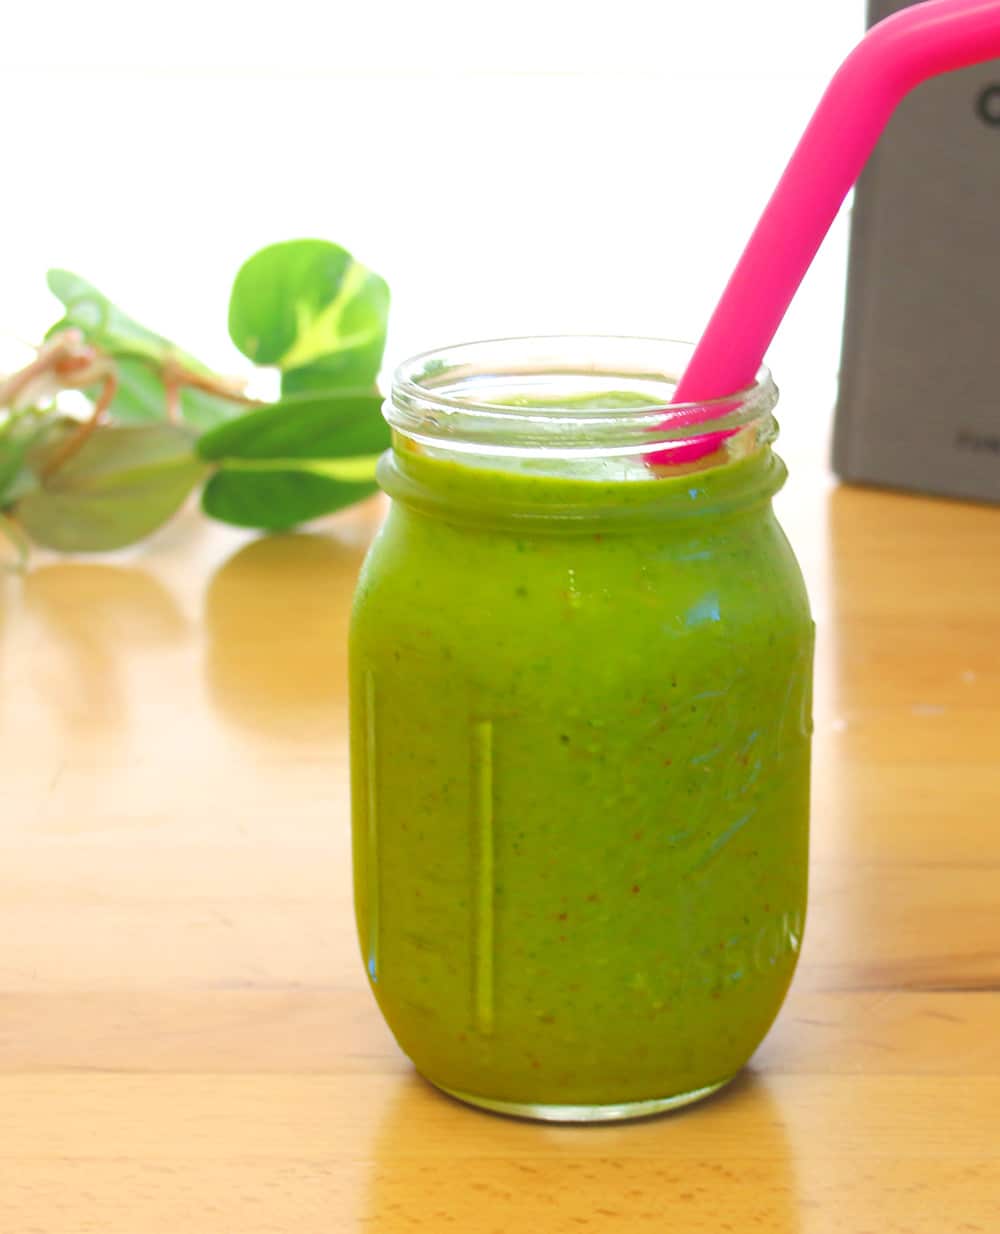 Kale and Spinach Smoothie by Corla Ingram